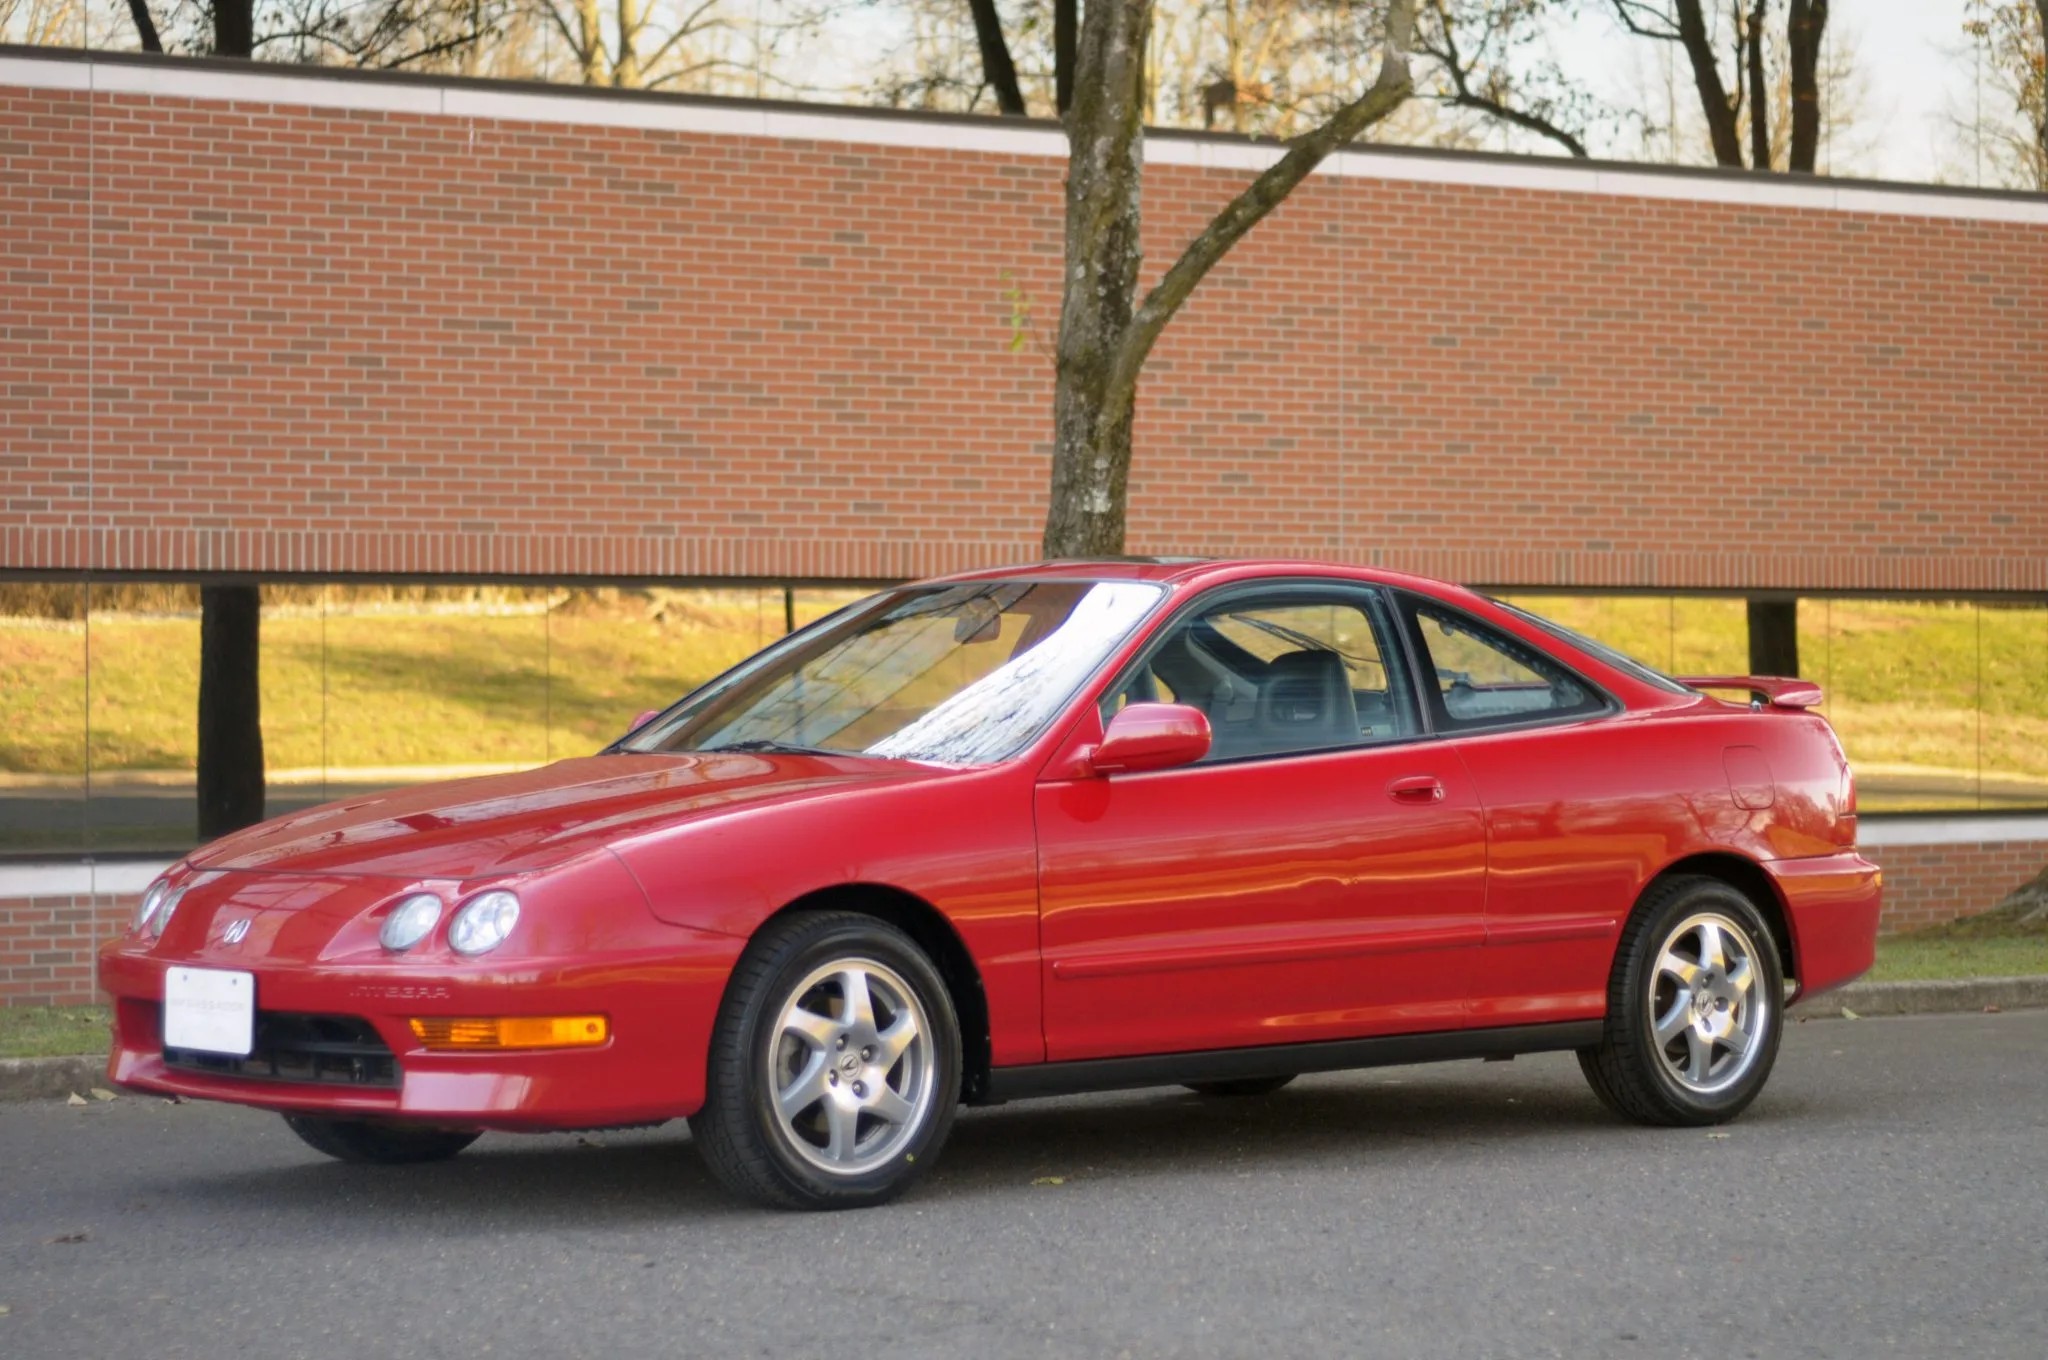 Start Your Year Right With This Mint 2000 Acura Integra GS-R - autoevolution